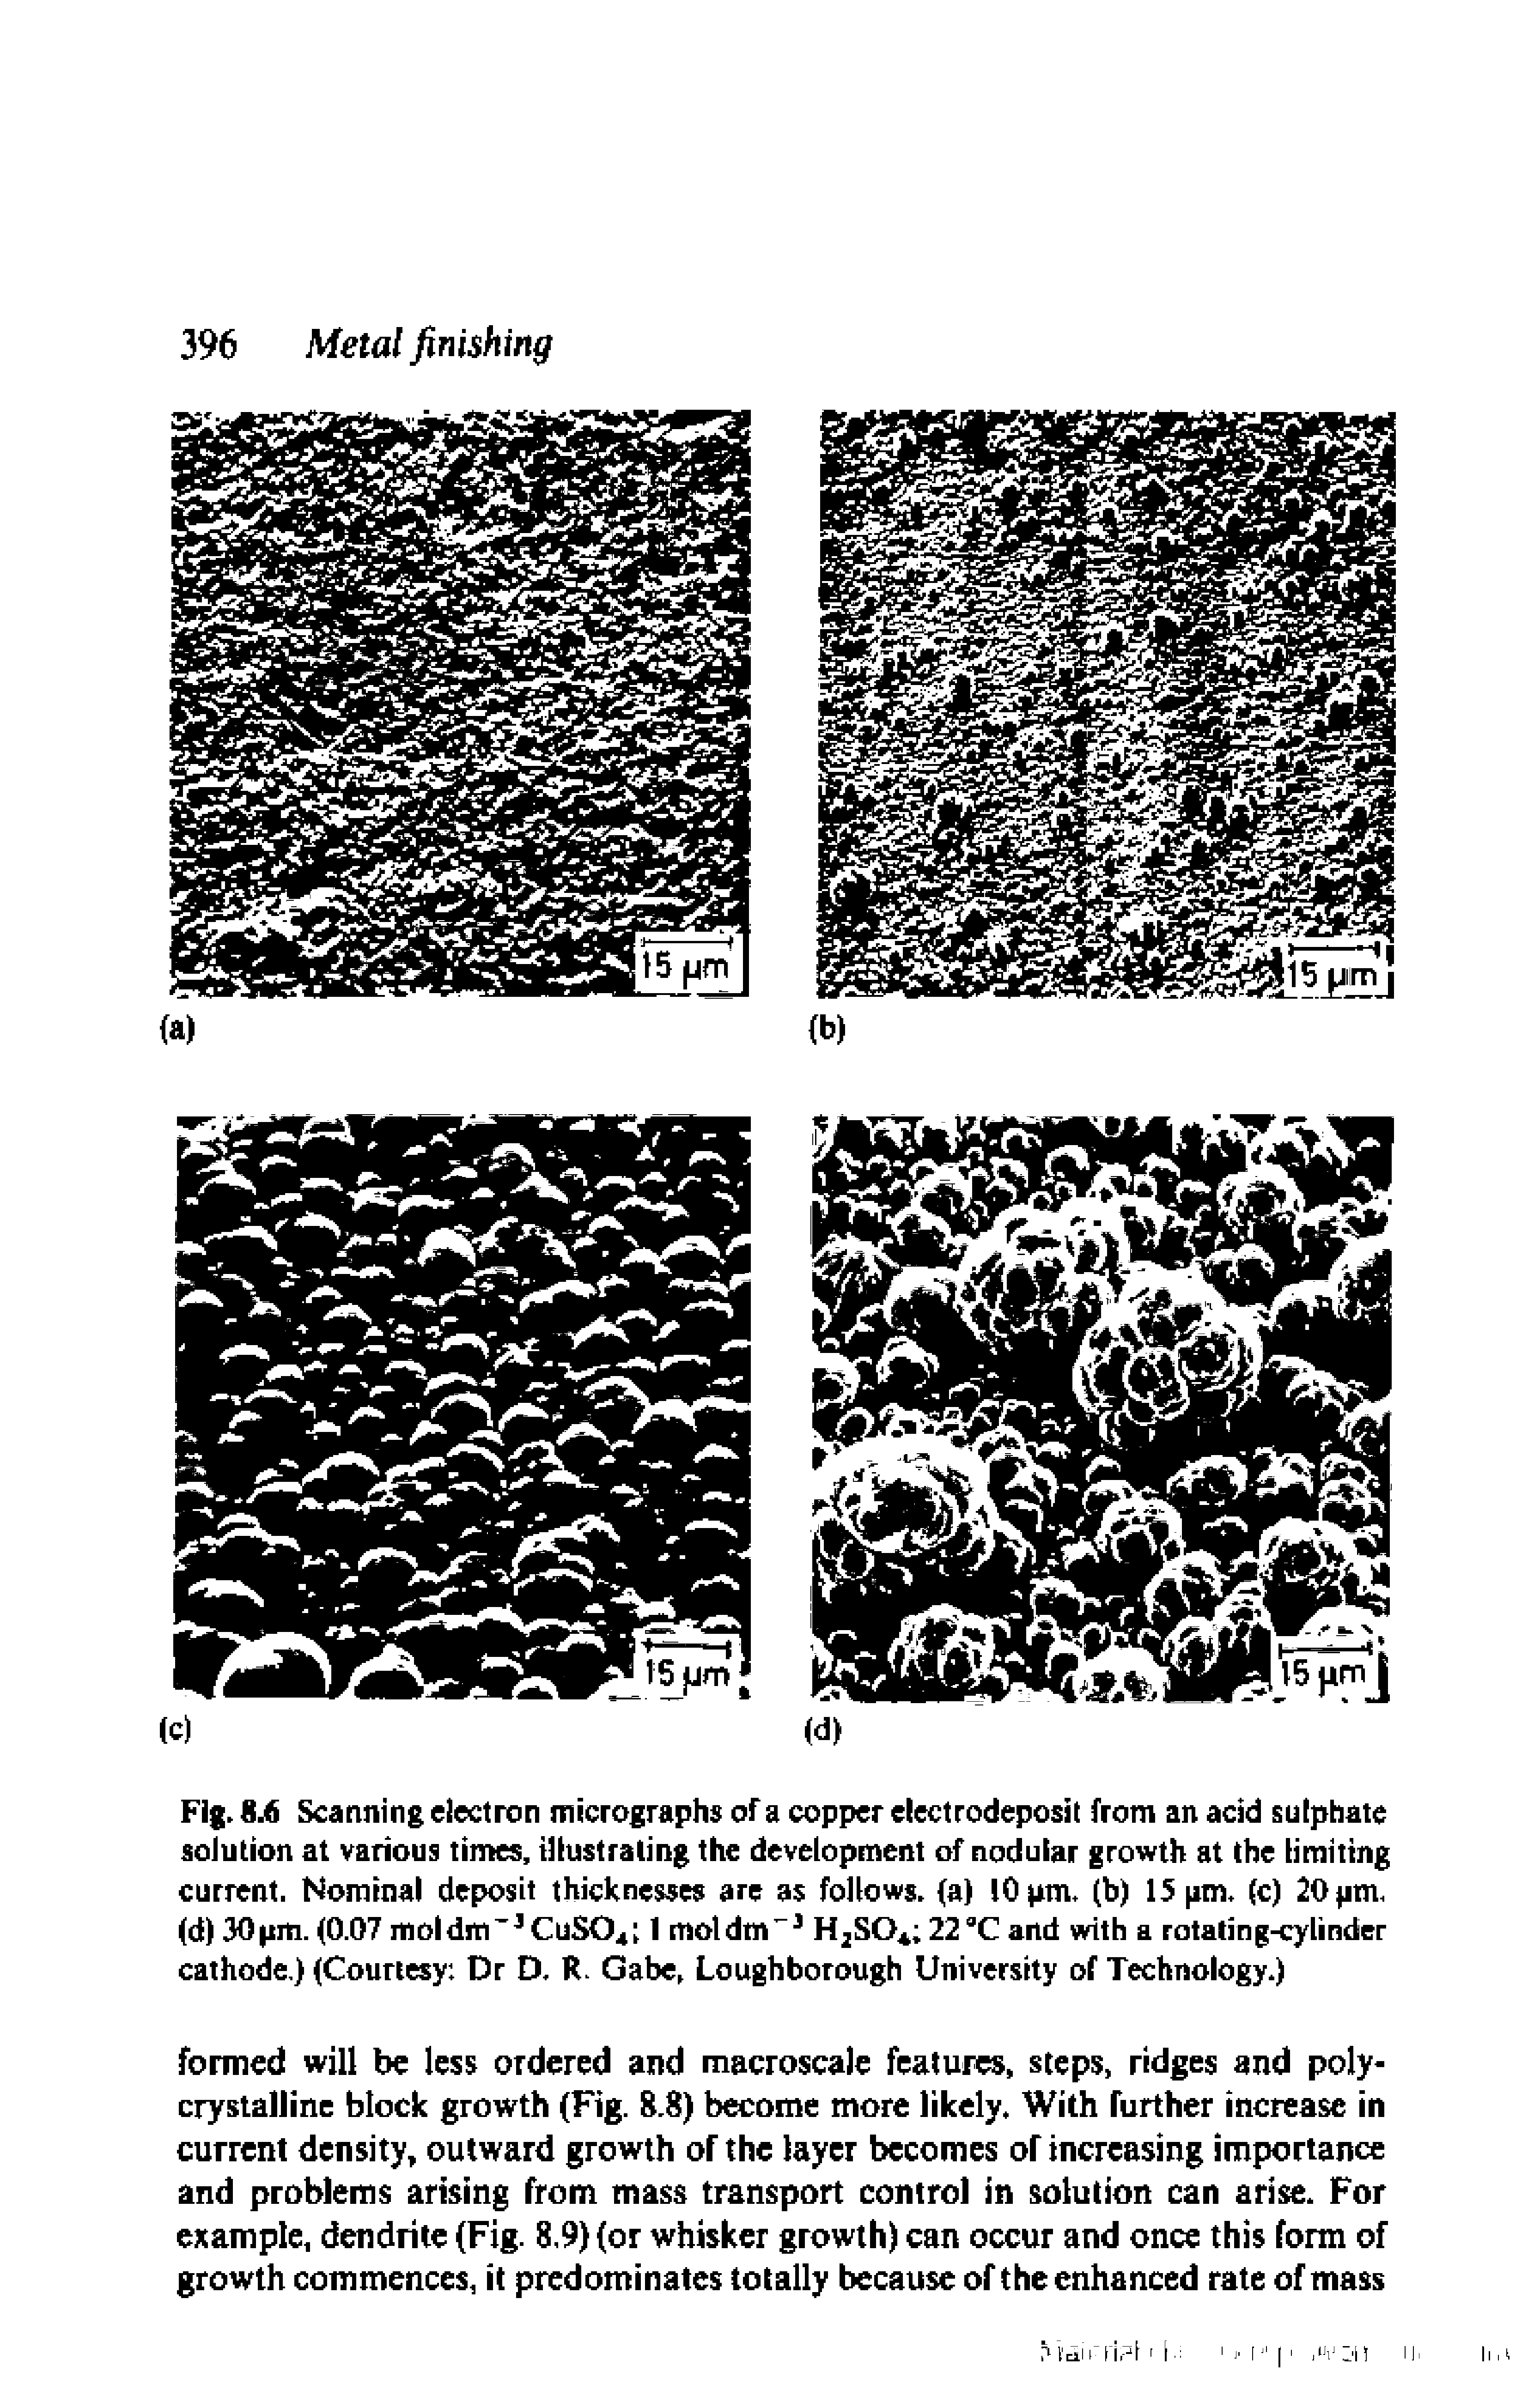 Fig. 8.6 Scanning electron micrographs of a copper electrodeposit from an acid sulphate solution at various times, illustrating the development of nodular growth at the limiting current. Nominal deposit thicknesses are as follows, (a) 10 pm. (b) 15 pm. (c) 20 pm. (d) 30piti. (0.07 molditi CuSO 1 mol dm H SO 22 C and with a rotating-cyLinder cathode.) (Courtesy Dr D. R. Gabe Loughborough University of Technology.)...